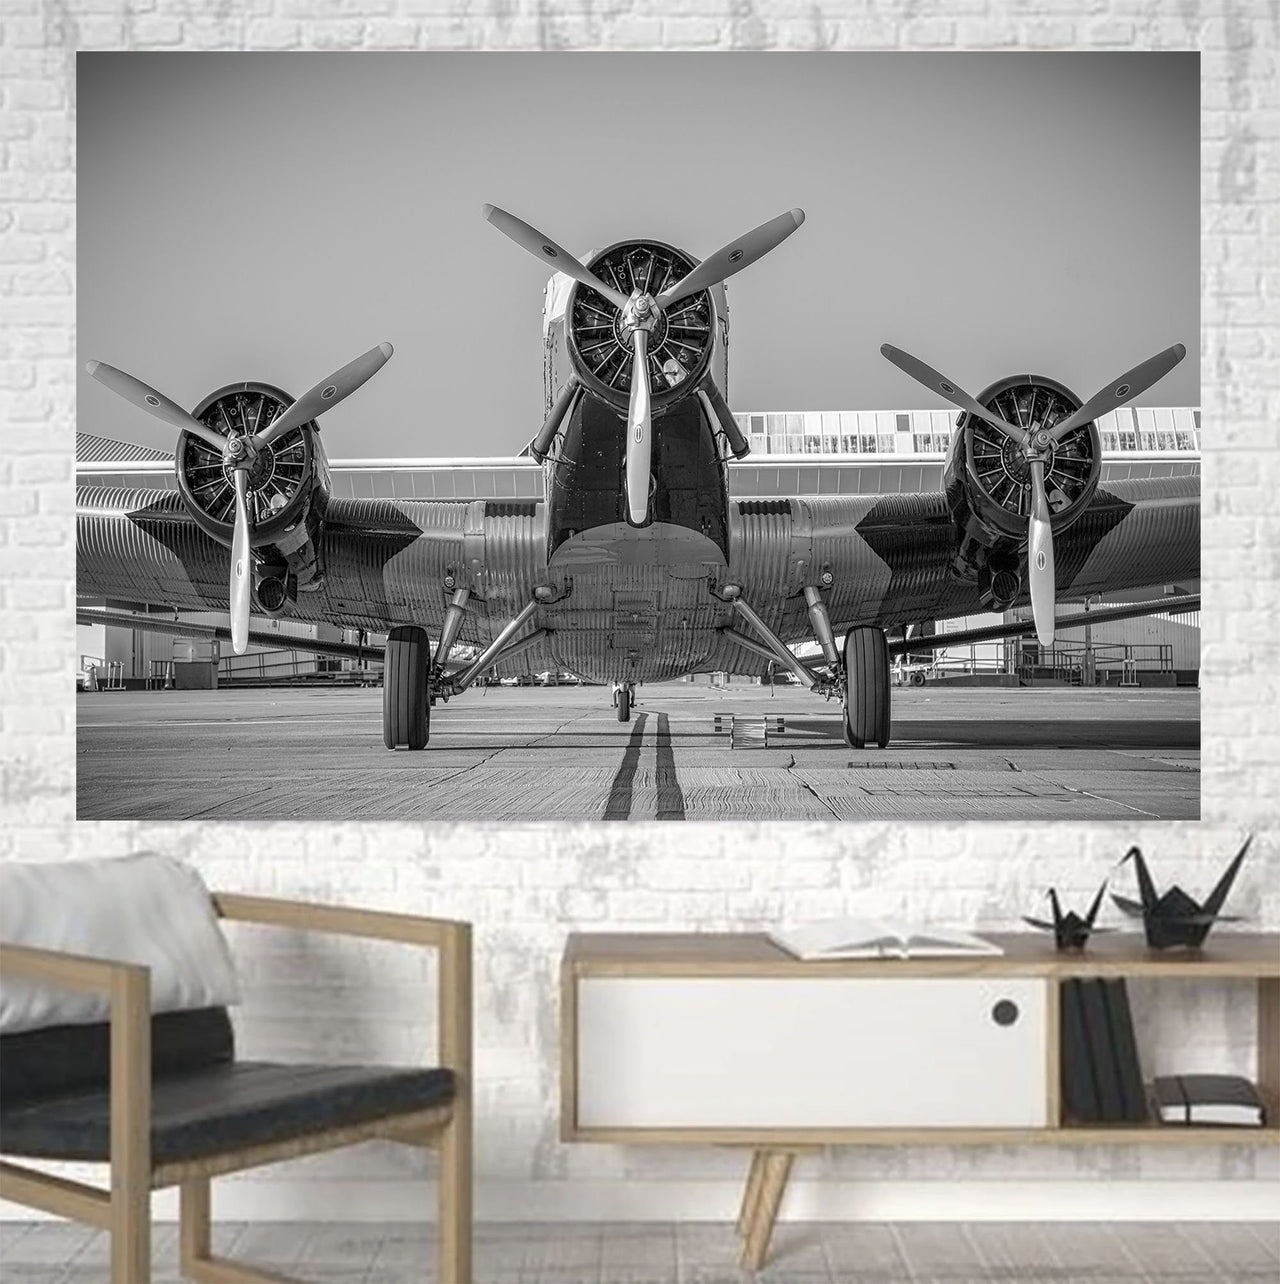 Face to Face to 3 Engine Old Airplane Printed Canvas Posters (1 Piece) Aviation Shop 